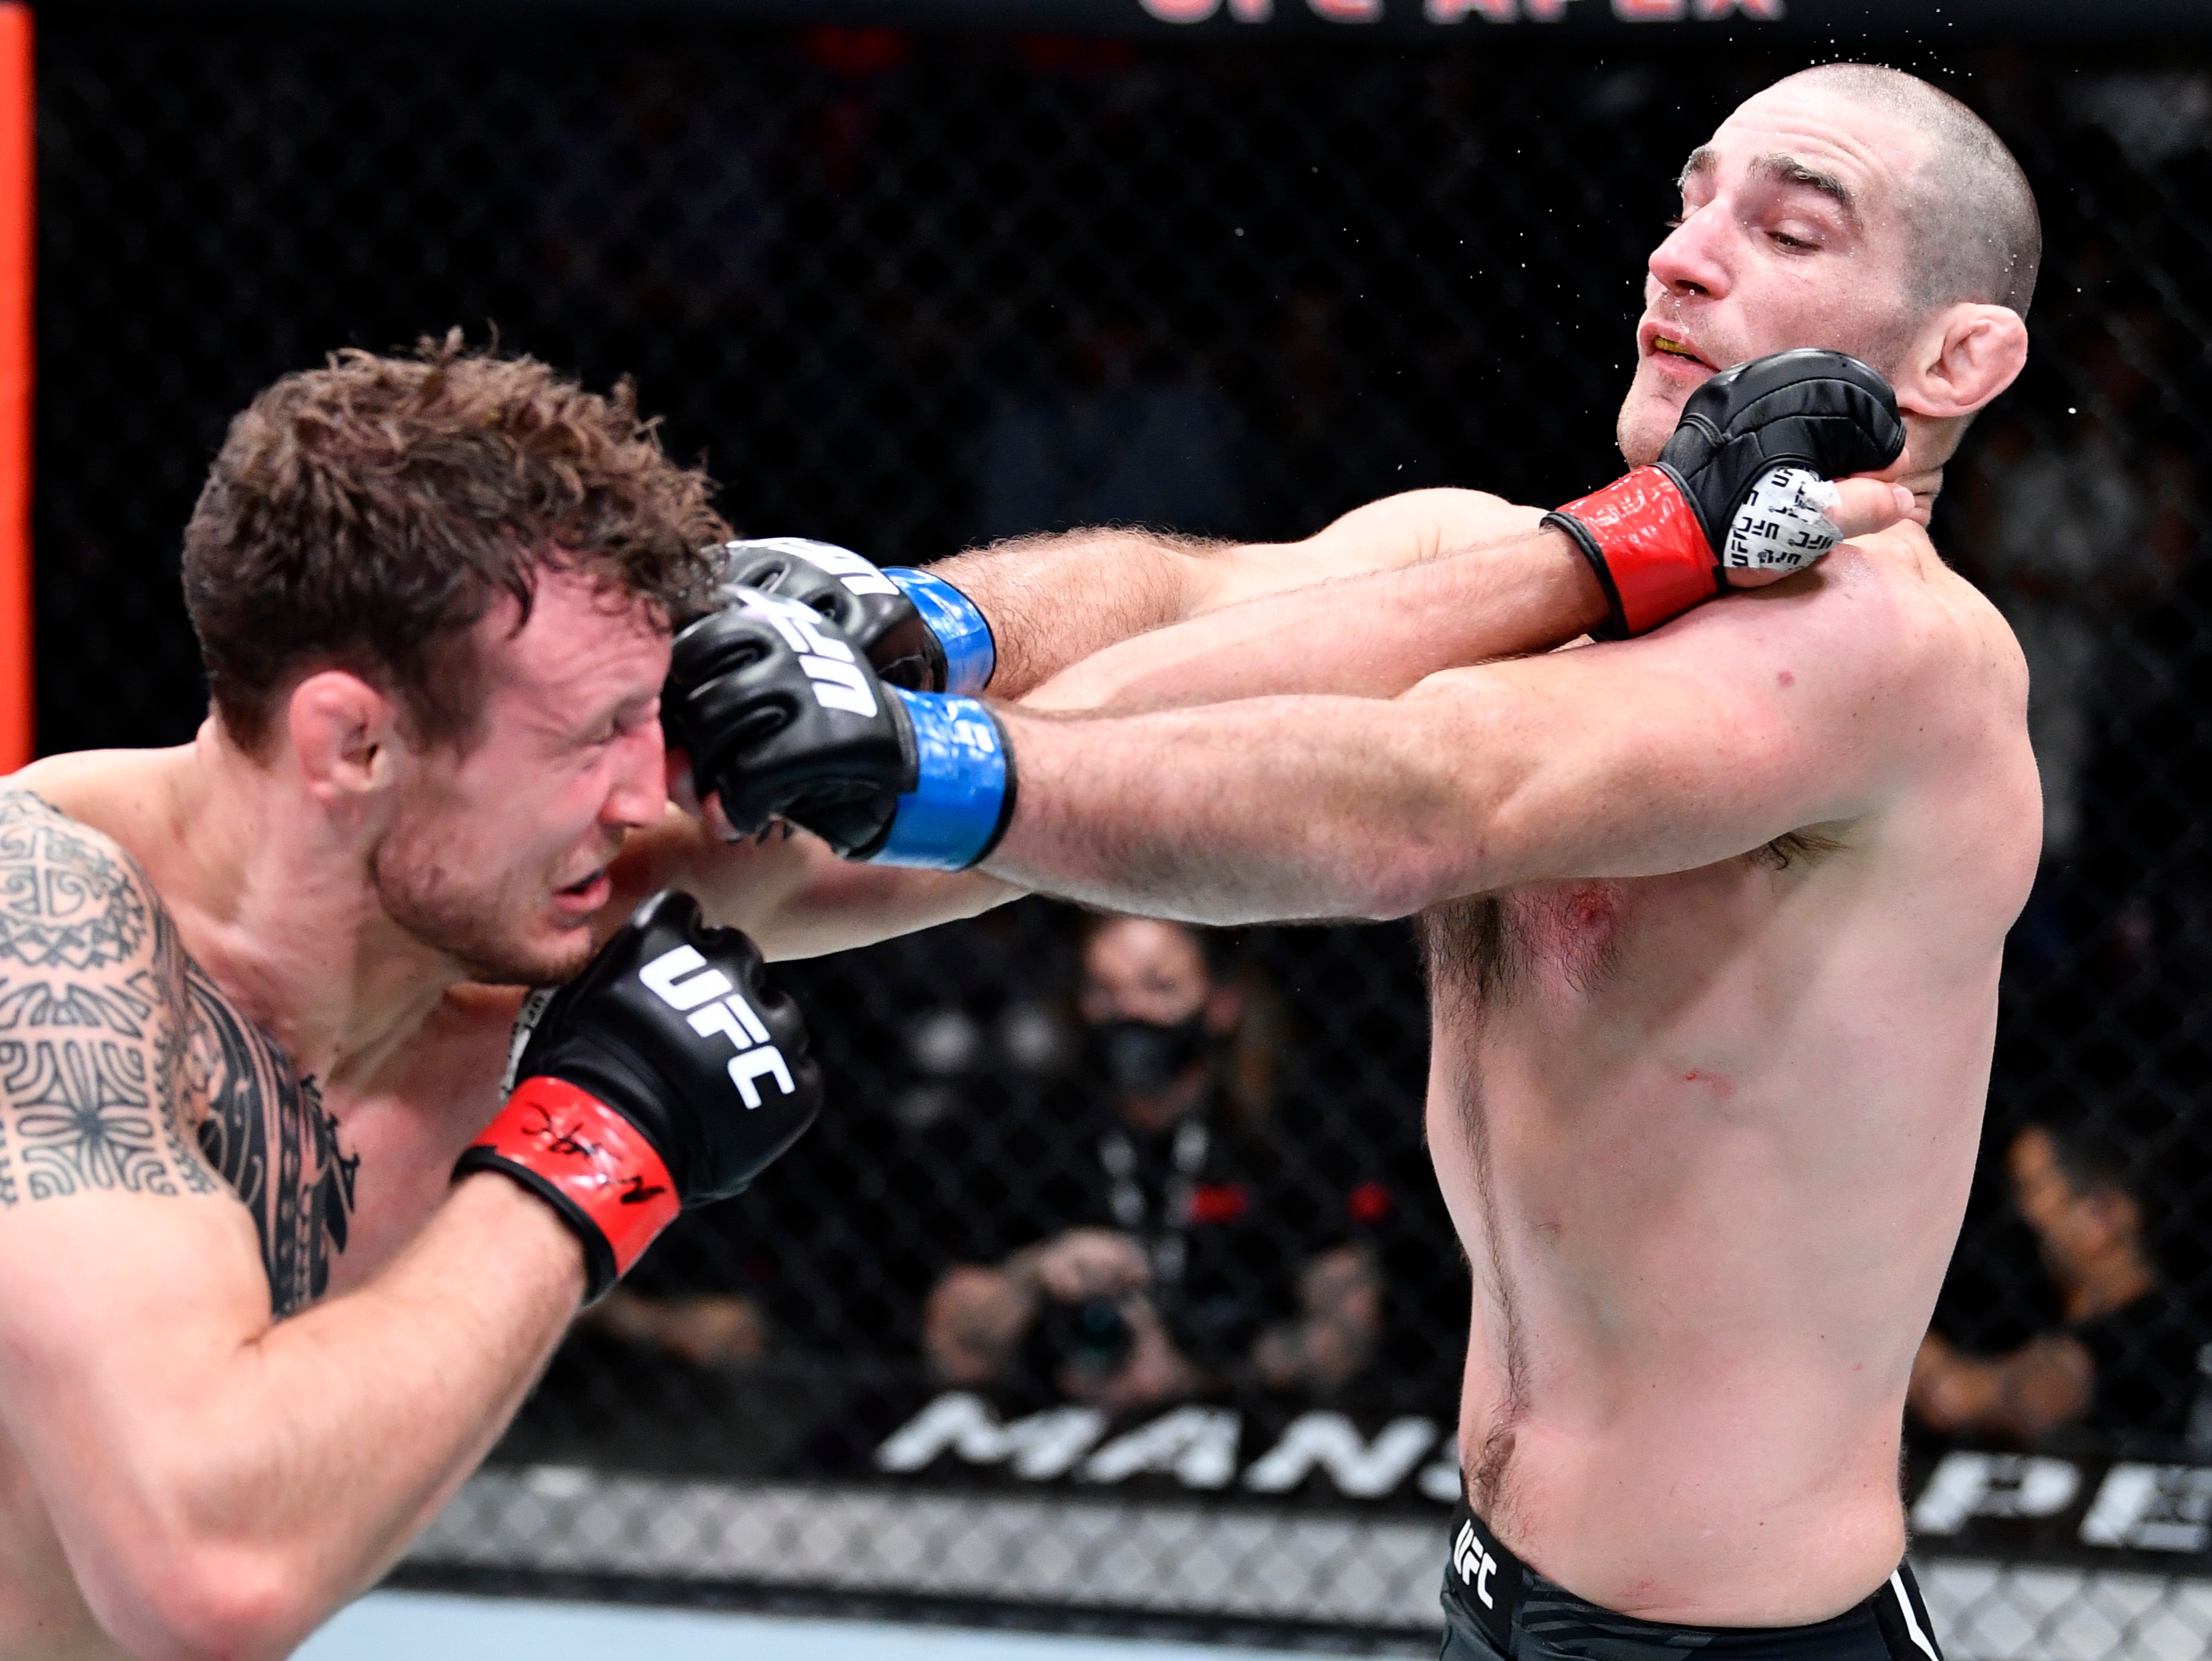 Sean Strickland (right) slips a punch while landing his own on Jack Hermansson